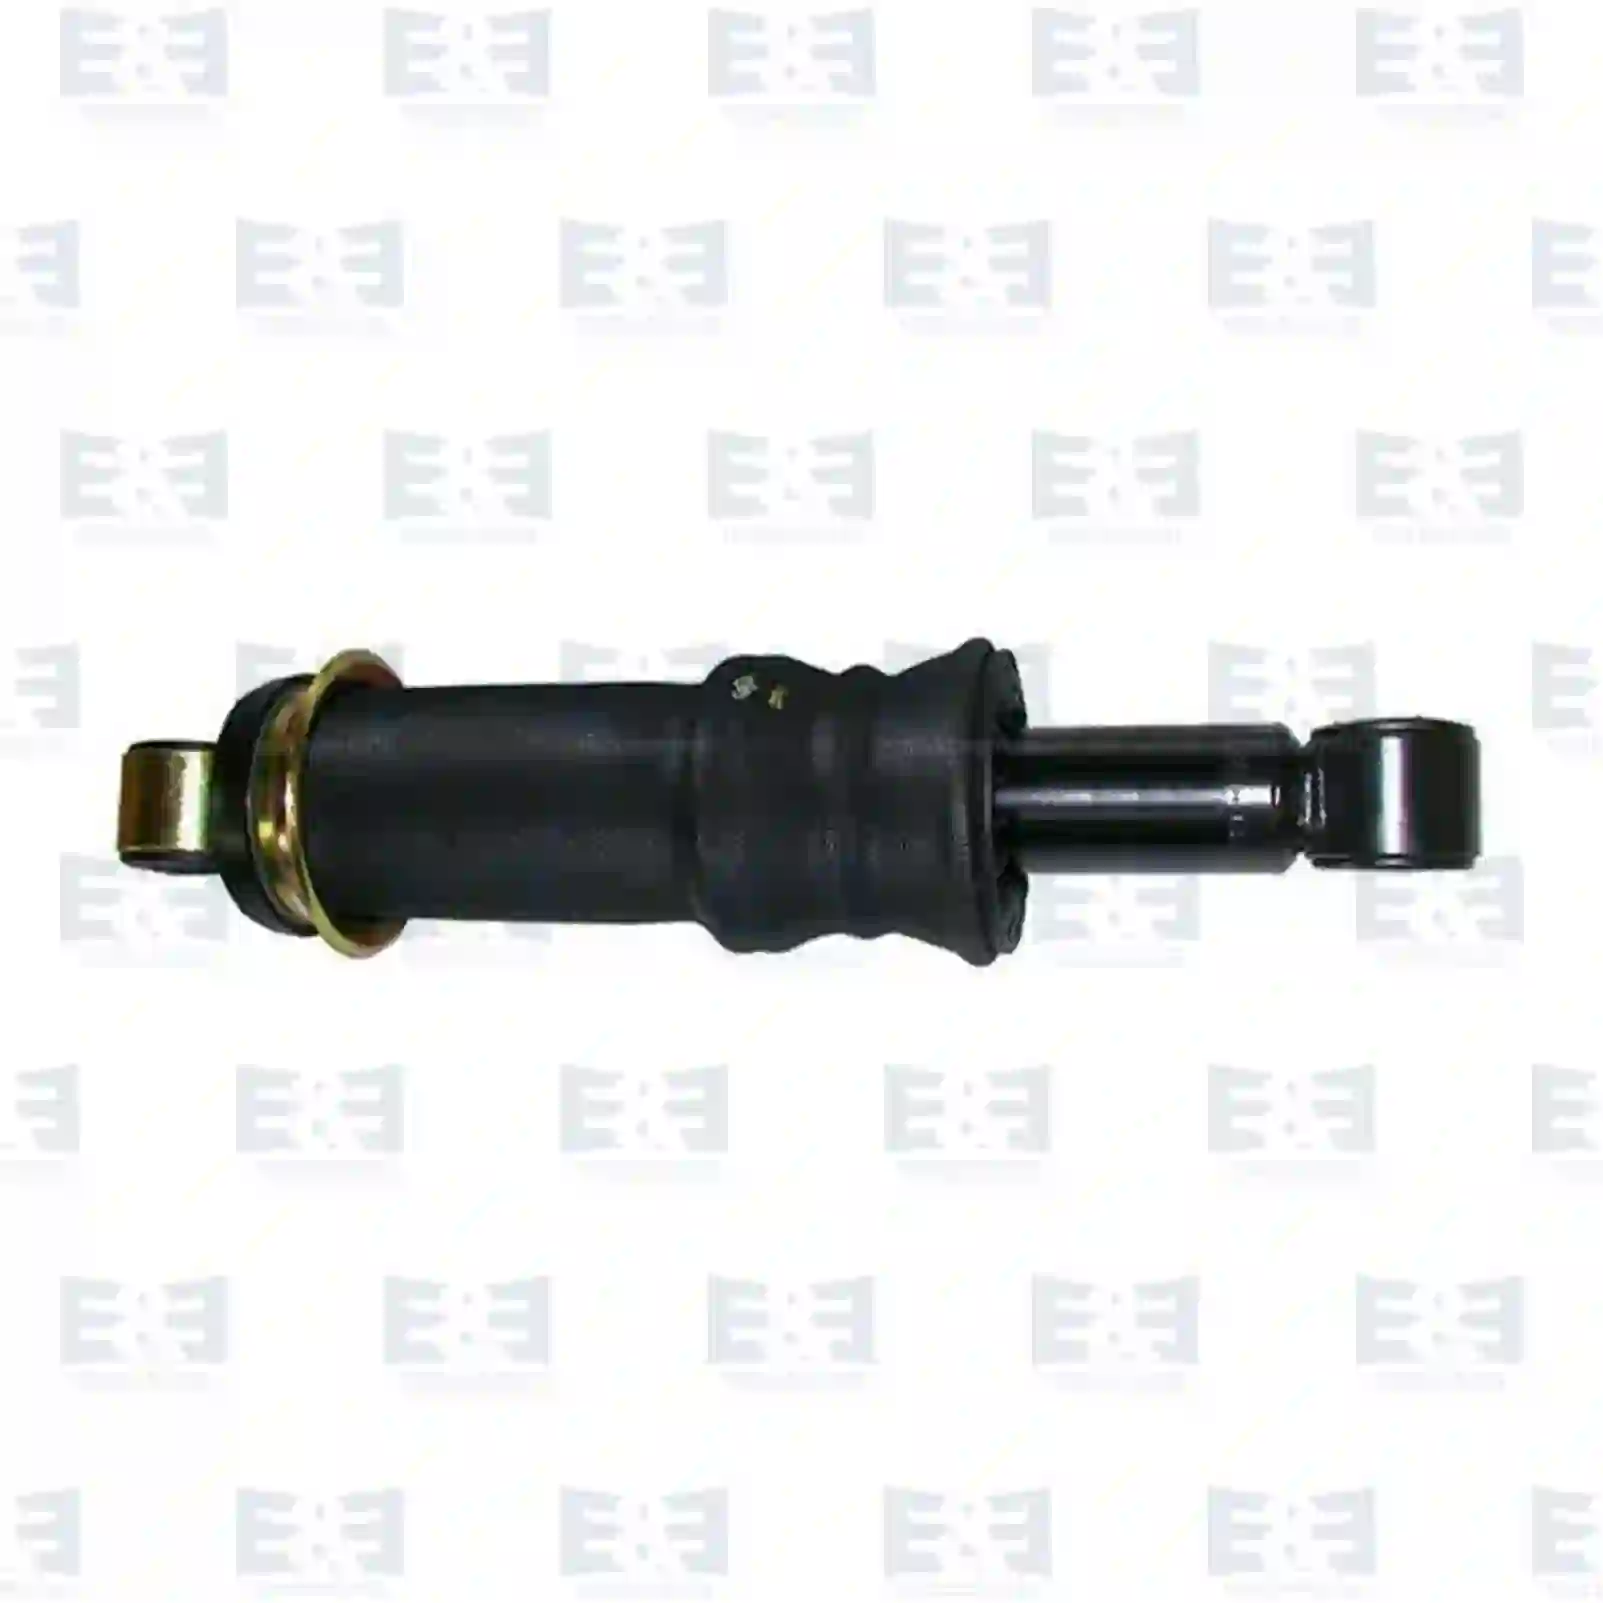 Cabin shock absorber, with air bellow, 2E2276378, 1075076, 1075077, 1629725, , ||  2E2276378 E&E Truck Spare Parts | Truck Spare Parts, Auotomotive Spare Parts Cabin shock absorber, with air bellow, 2E2276378, 1075076, 1075077, 1629725, , ||  2E2276378 E&E Truck Spare Parts | Truck Spare Parts, Auotomotive Spare Parts